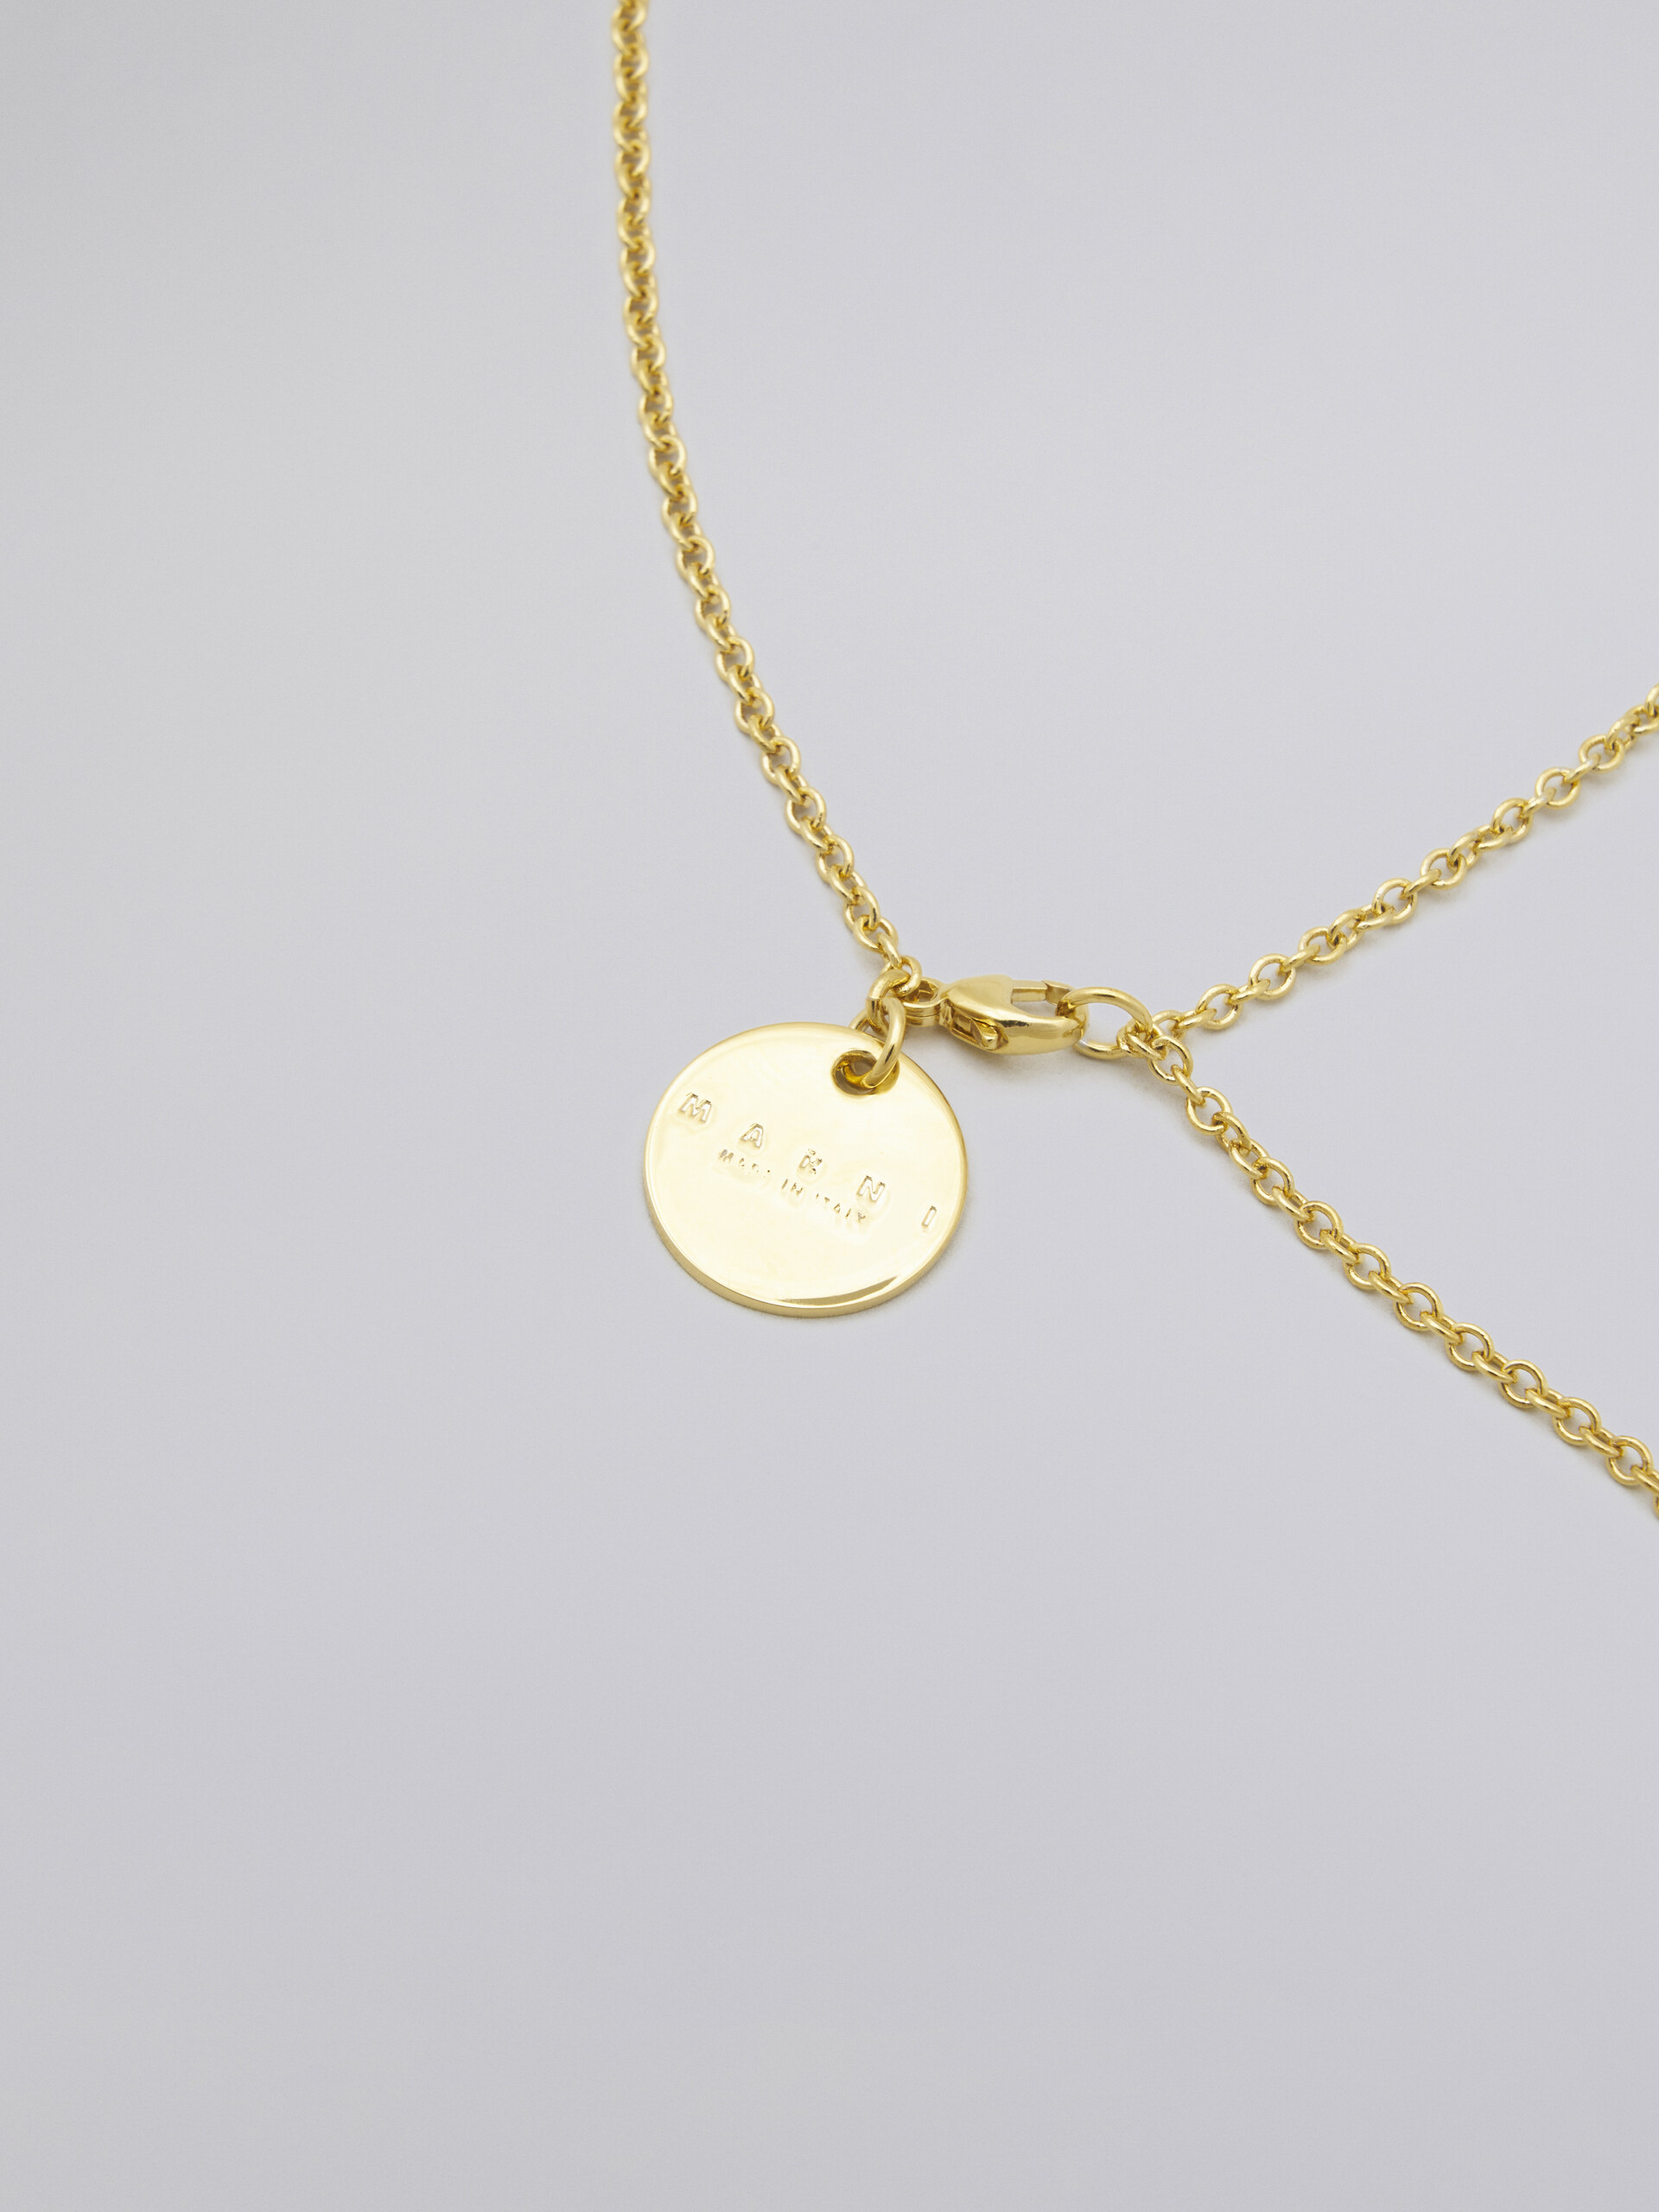 Gold-tone metal TRAPEZE necklace with transparent enamel-covered pendant - Necklaces - Image 2